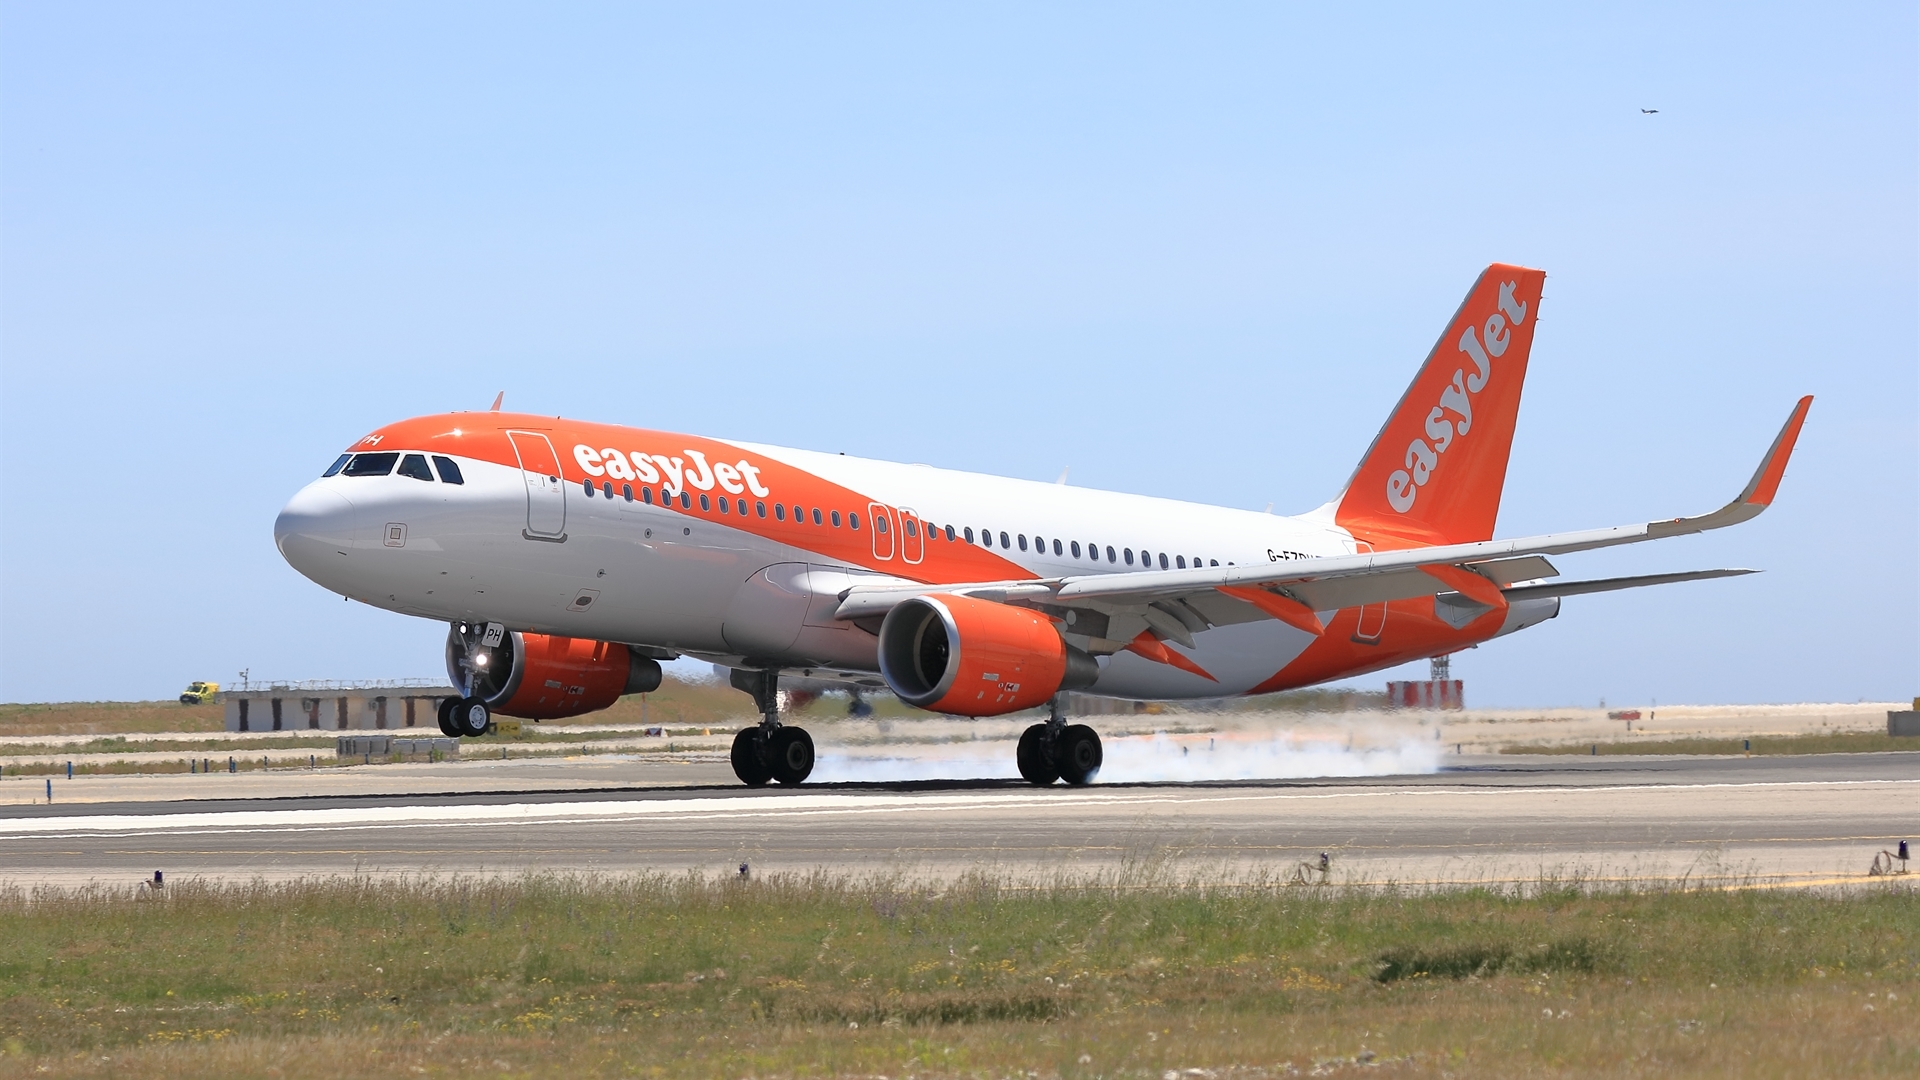 Is EasyJet a UK or EU carrier?